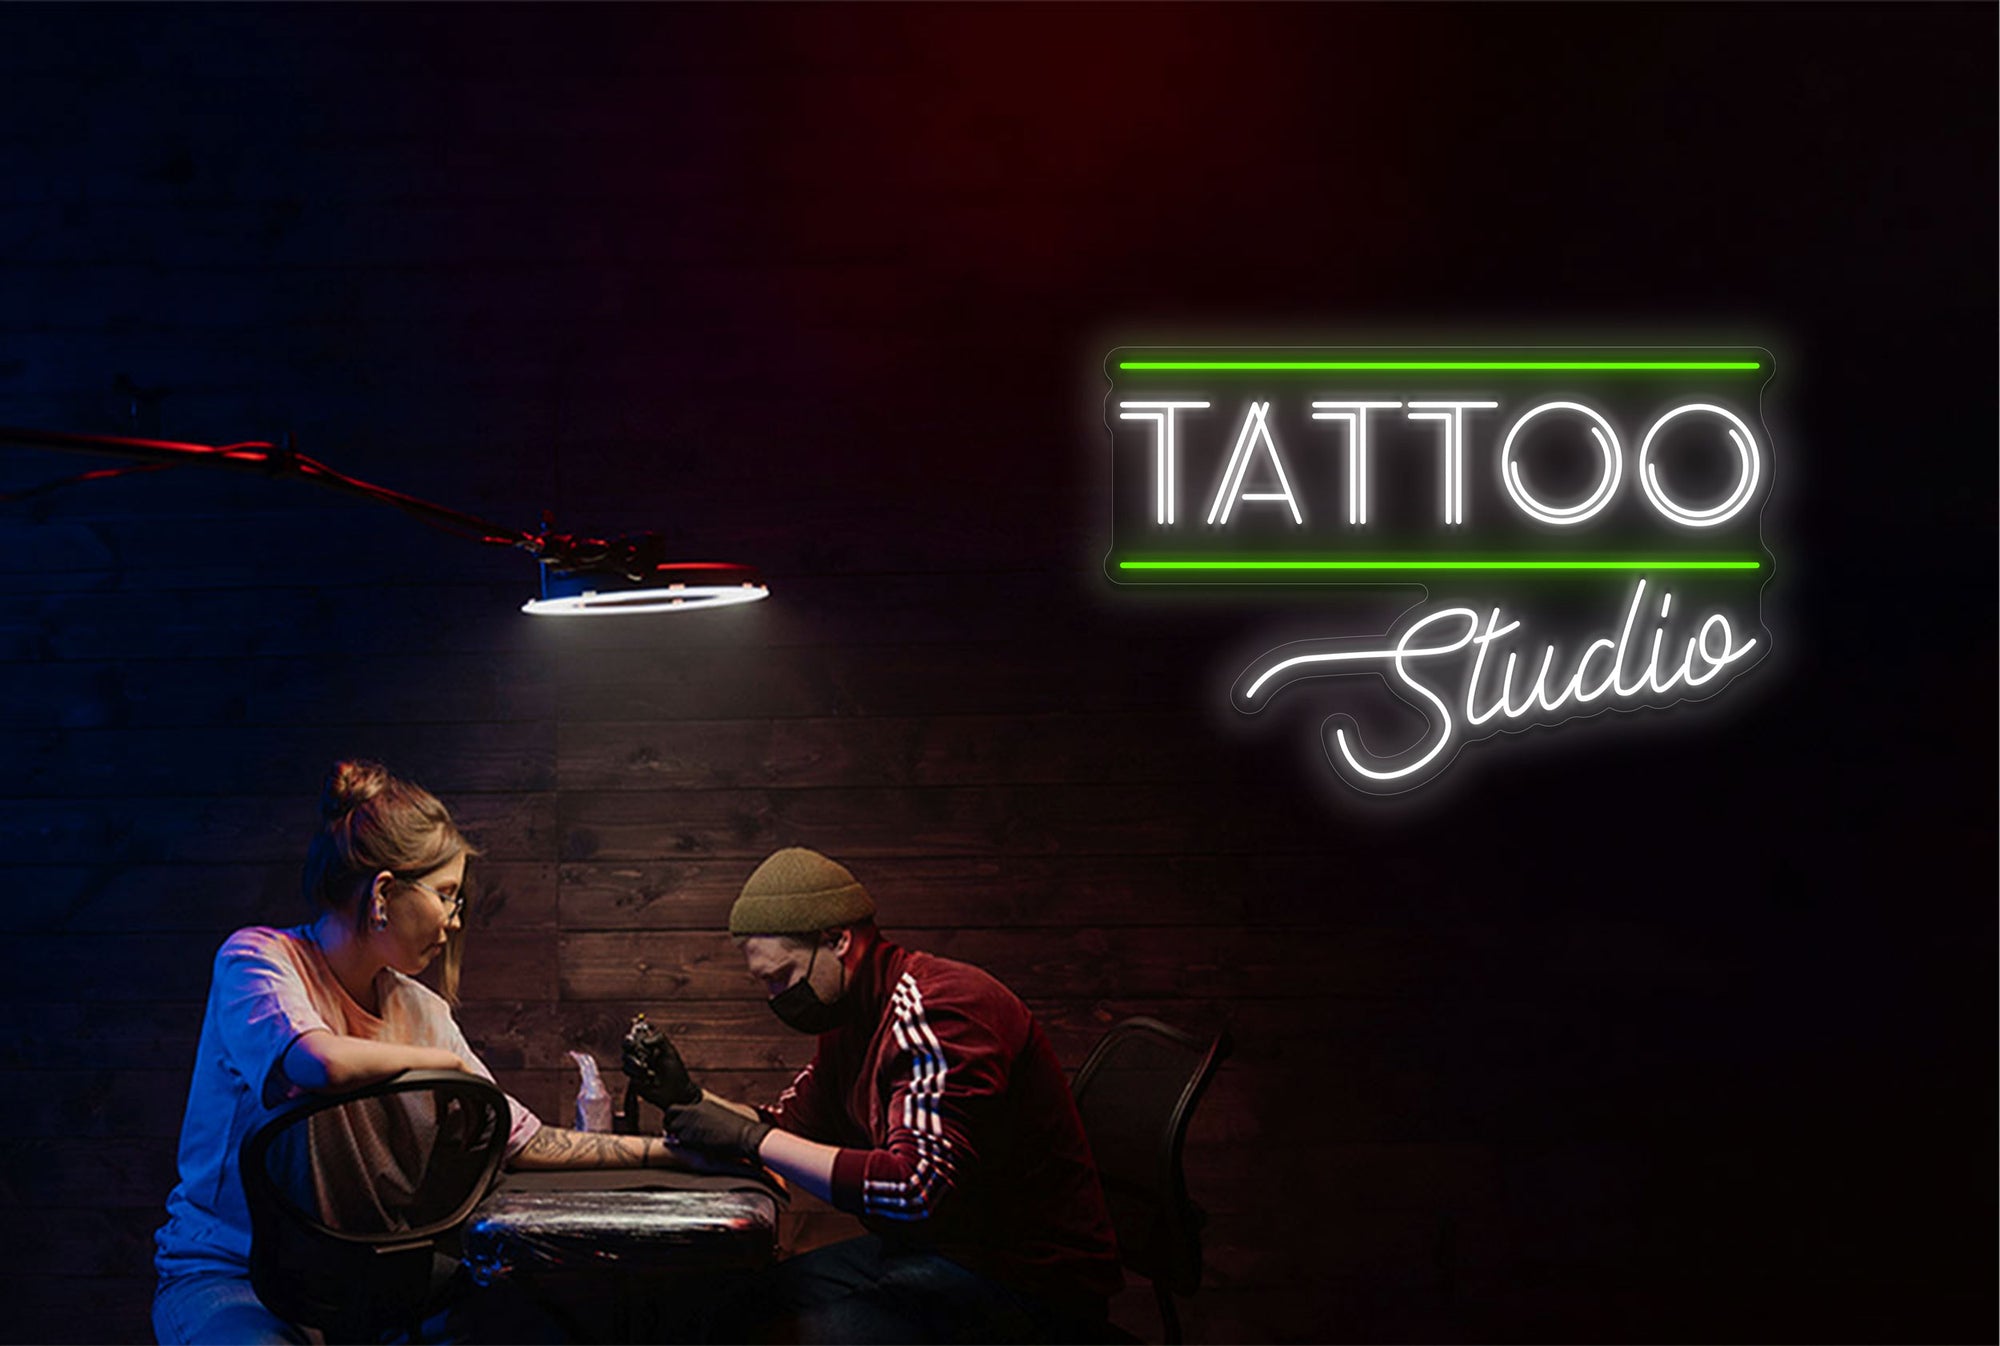 "Tattoo Studio" with 2 Lines LED Neon Sign